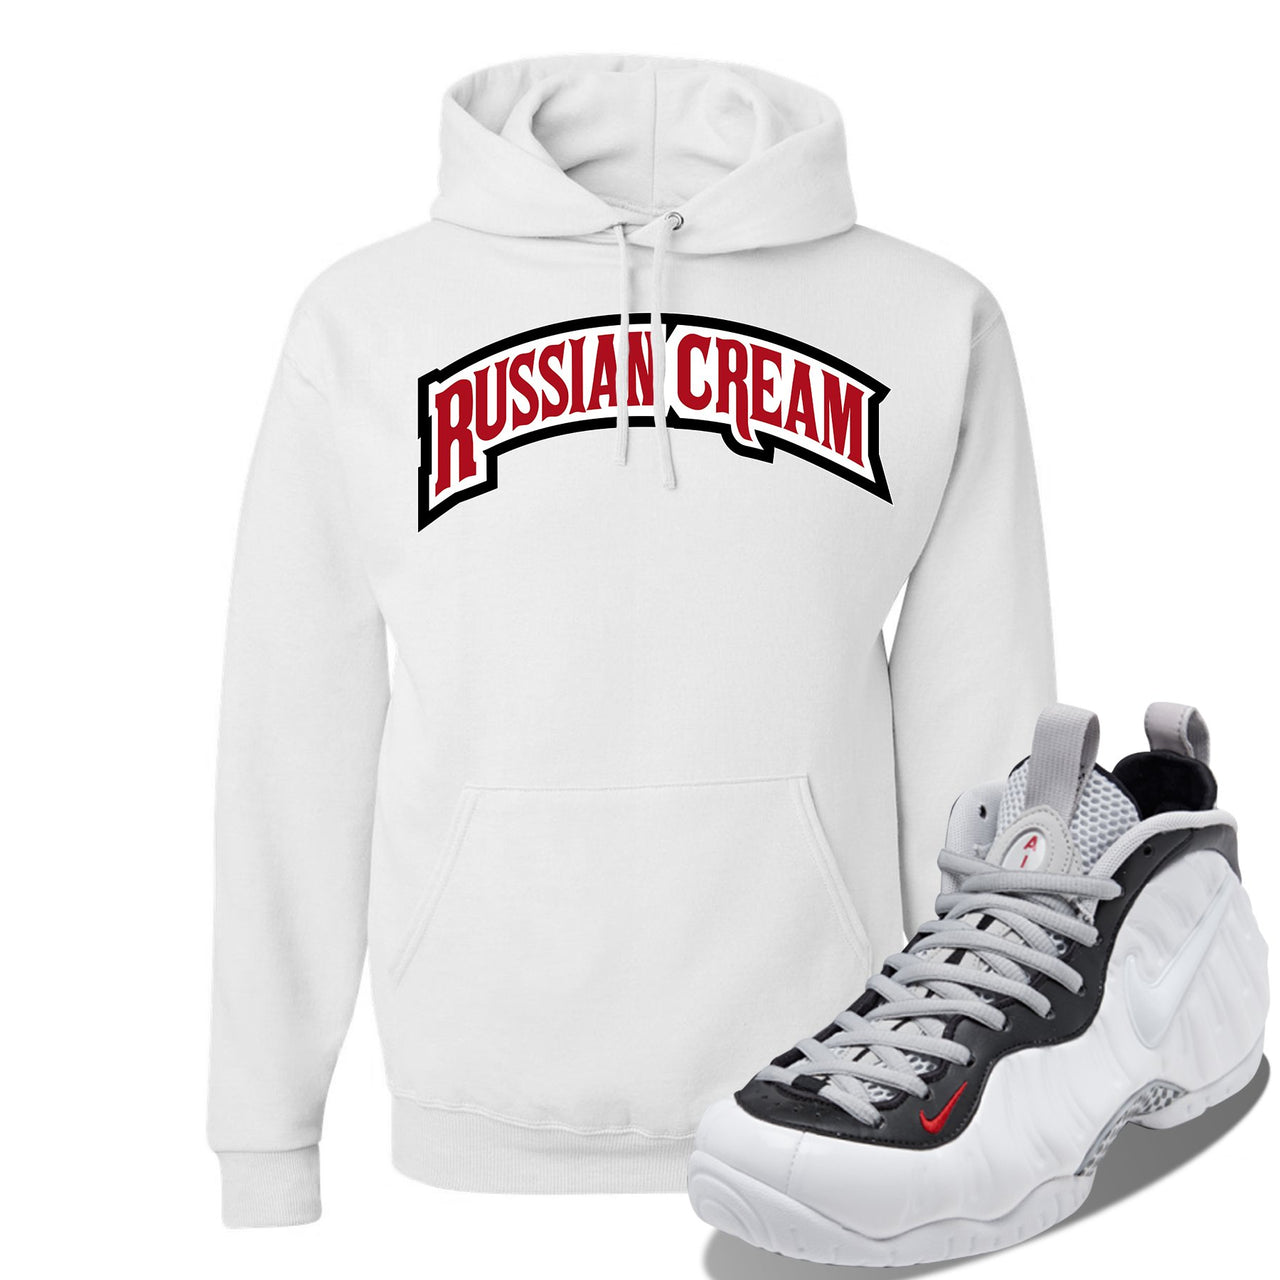 Foamposite Pro White Black University Red Sneaker White Pullover Hoodie | Hoodie to match Nike Air Foamposite Pro White Black University Red Shoes | Russian Cream Arch